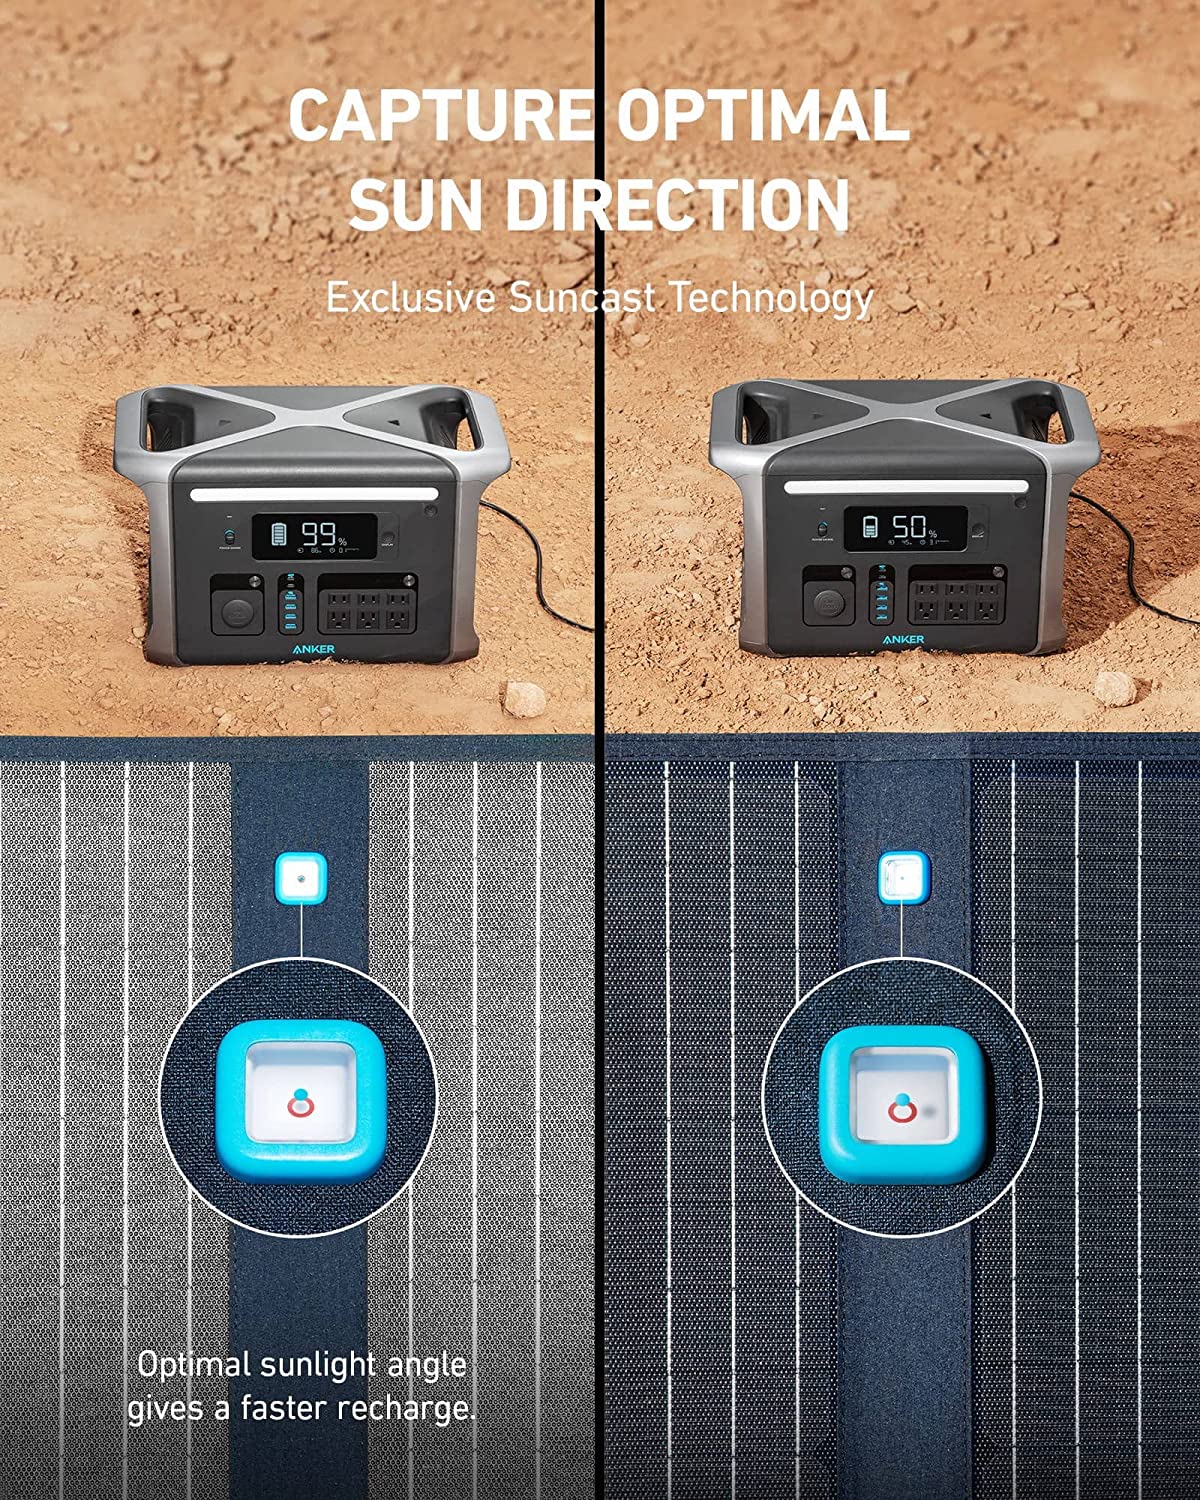 A picture of a solar panel with the ability to capture optimal sun direction for emergency food storage.